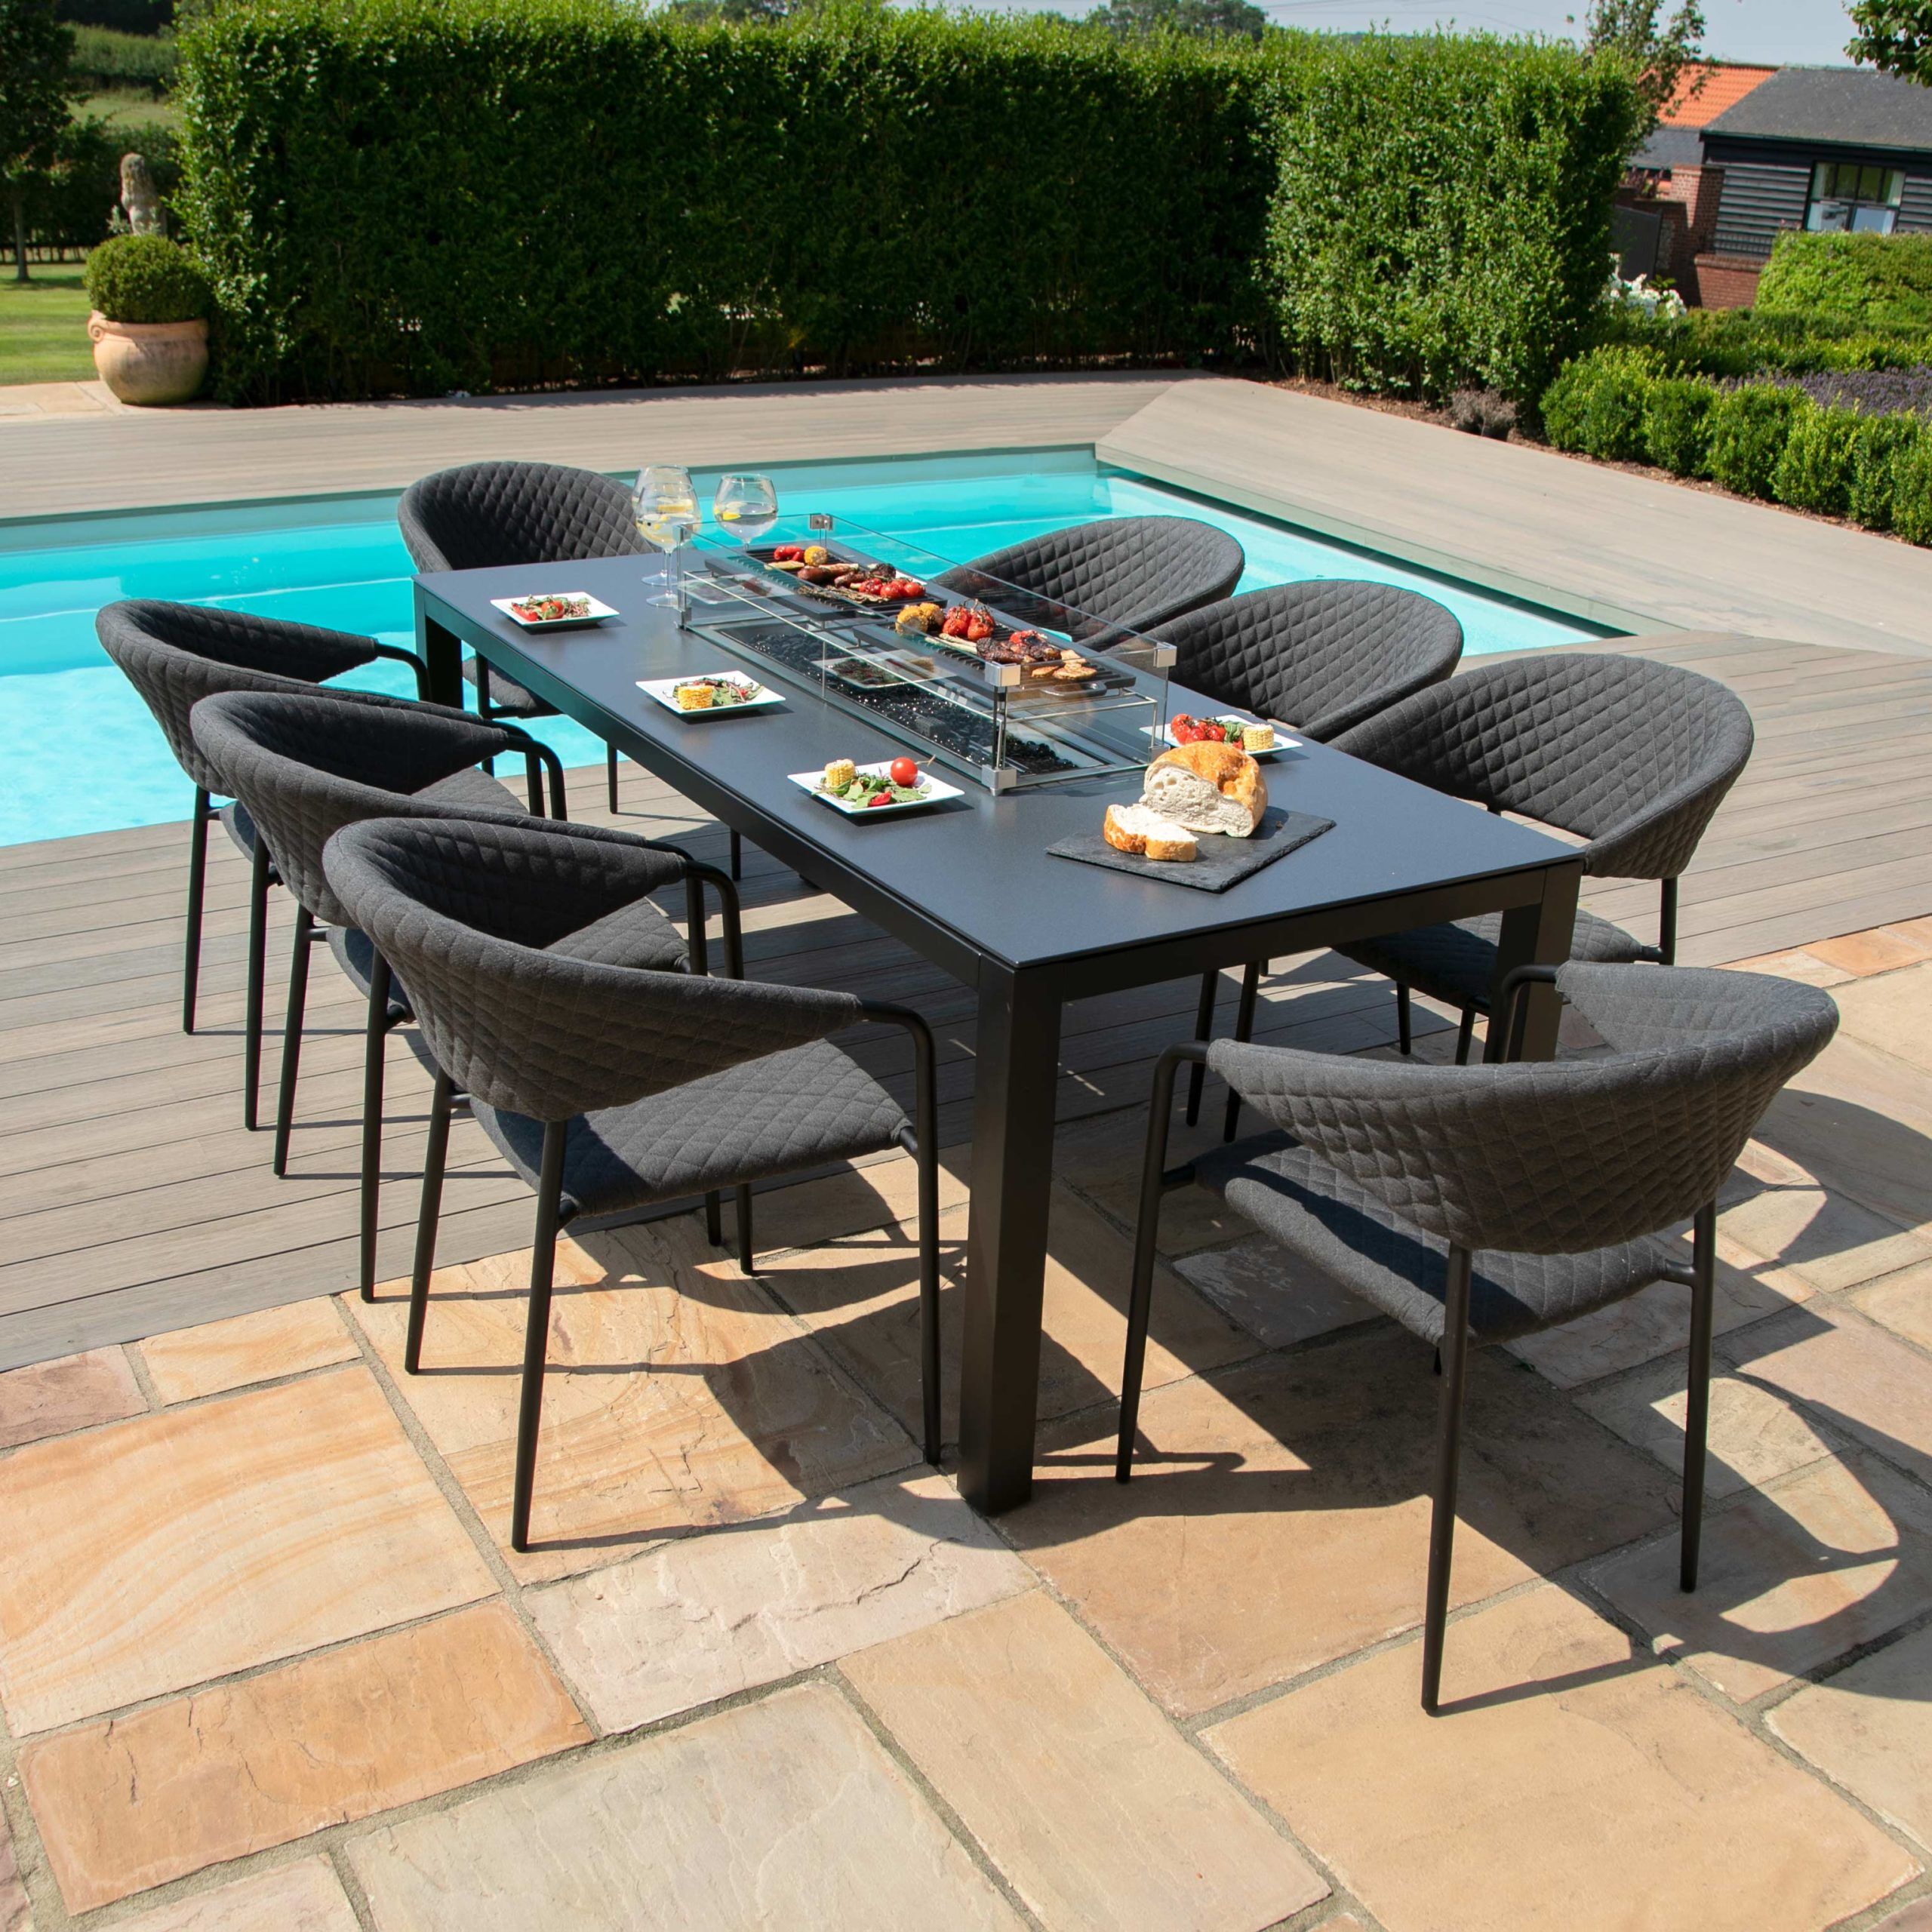 Maze Pebble 8 Seat Rectangular Dining Set Fire Pit Table   Charcoal